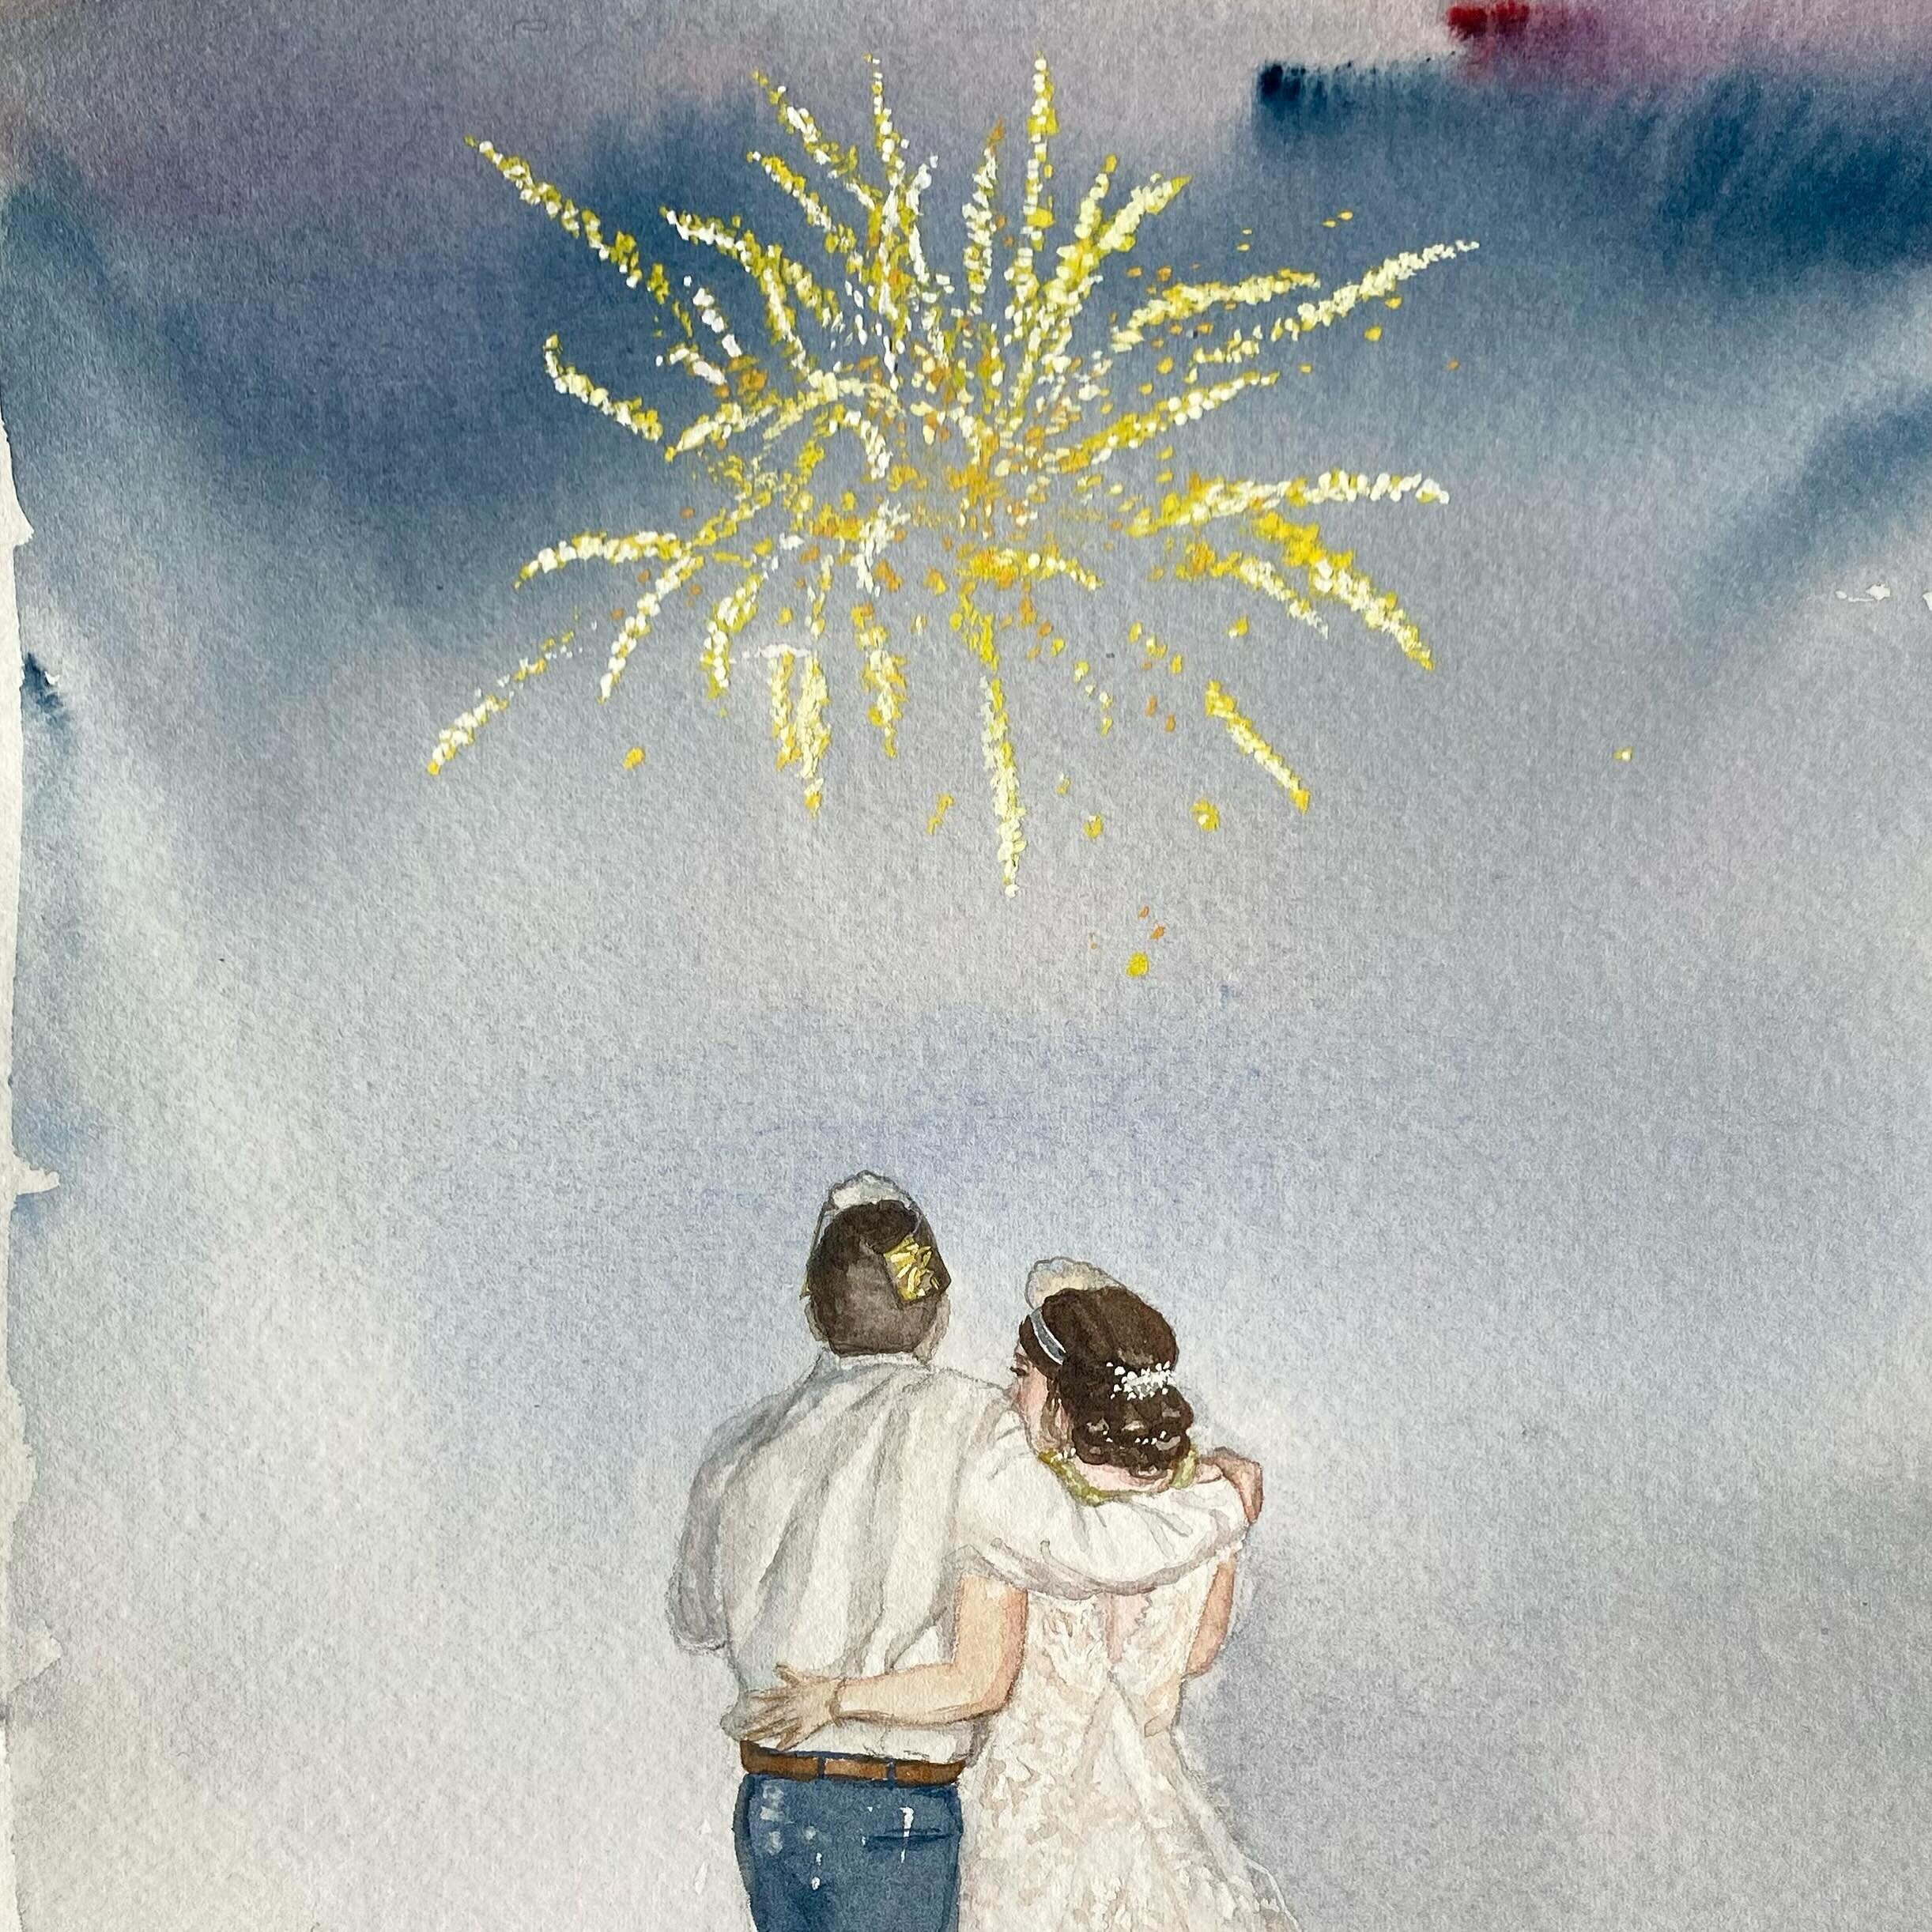 Detail of a New Year's Eve wedding portrait commission for a sweet friend.

I played around with many watercolor techniques in my sketches and settled on using gauche for the fireworks and lace. I kinda love how it turned out!

#weddingportrait #newy